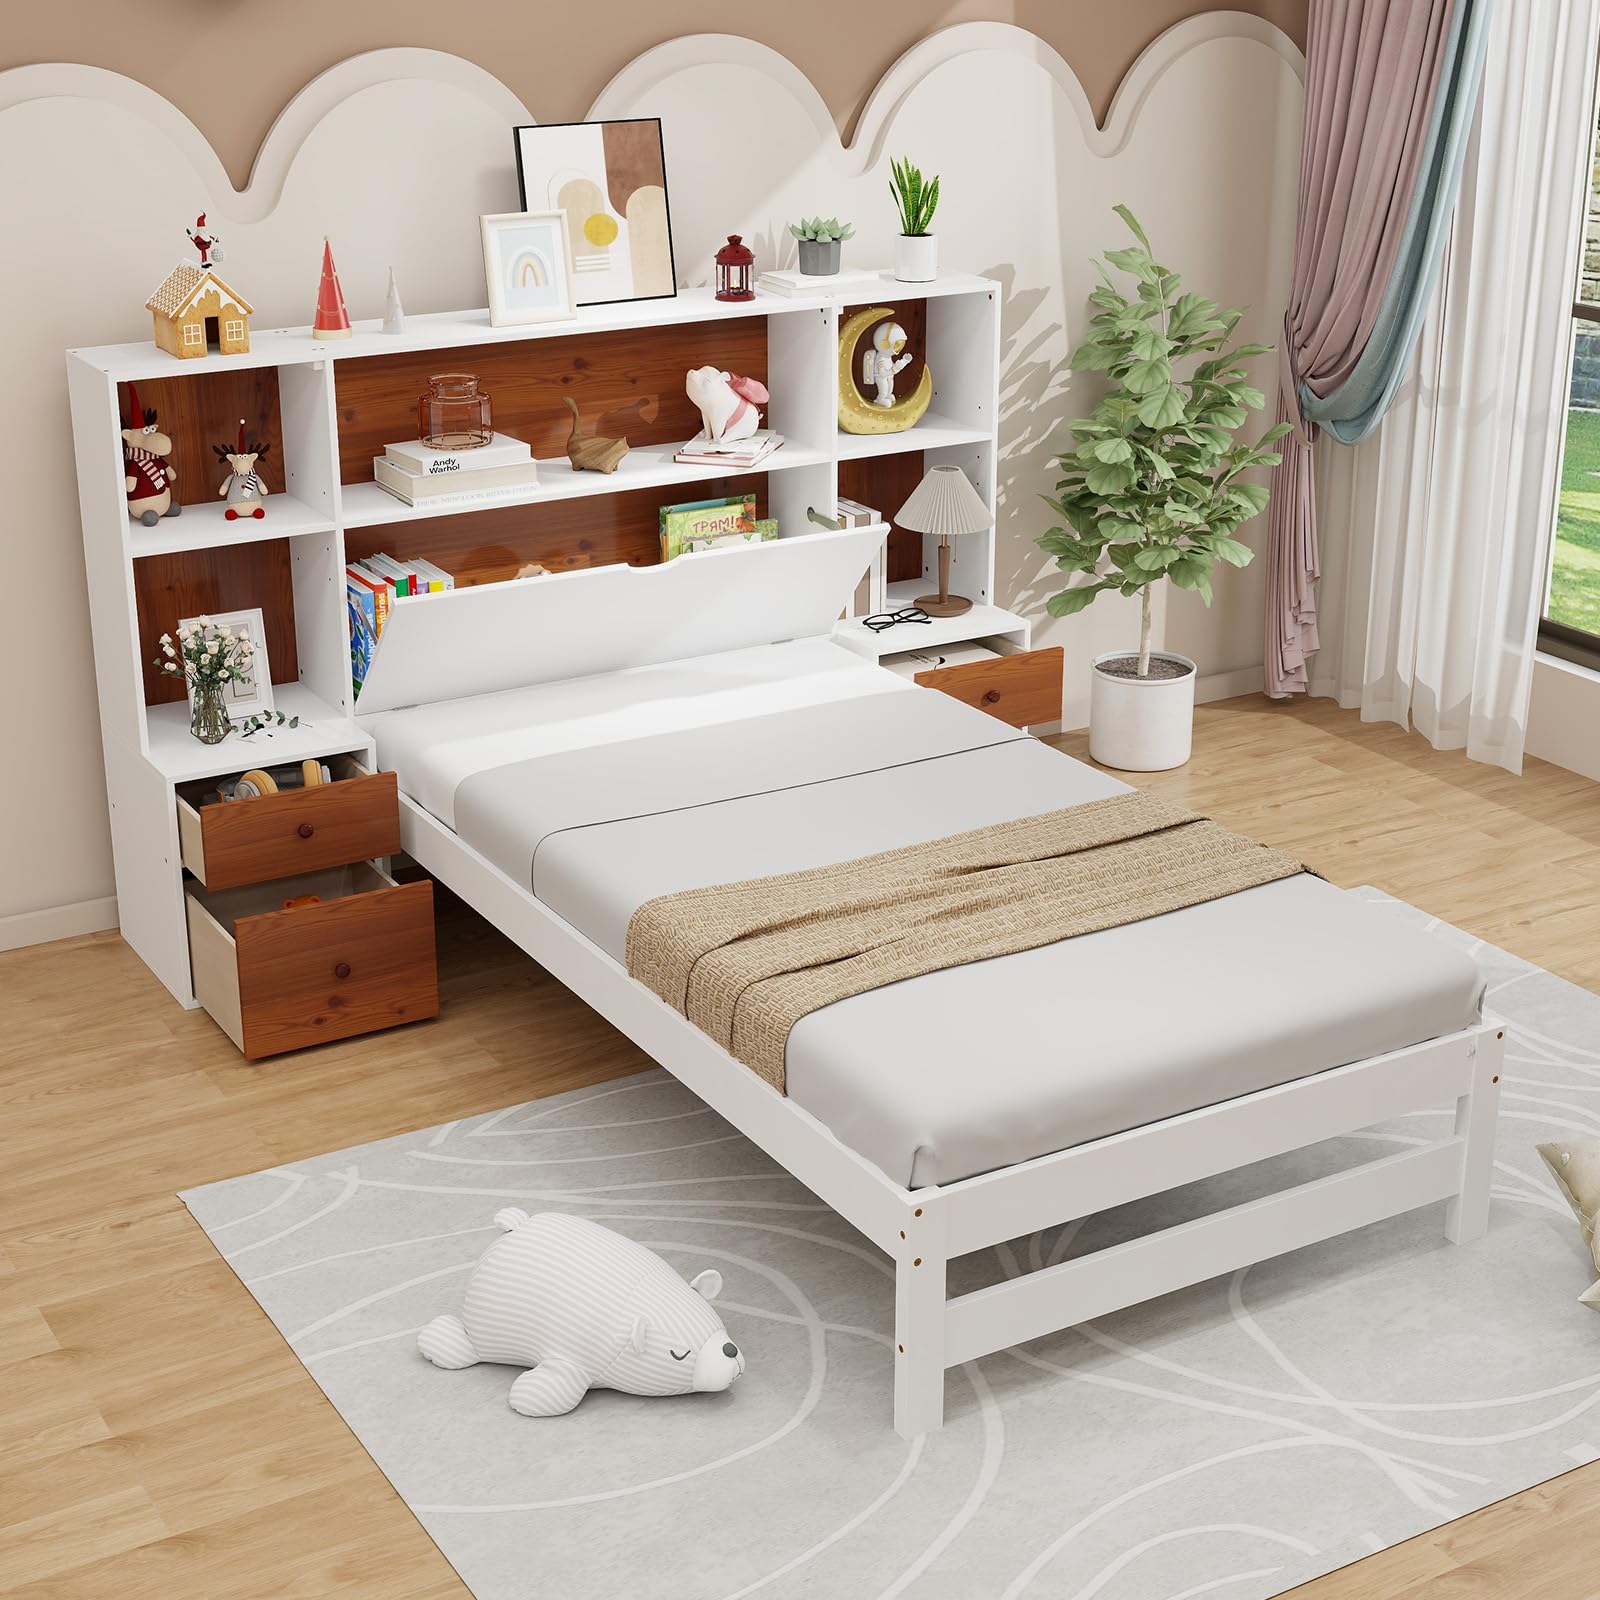 Giantex Twin Bed Frames with Headboard and Drawer